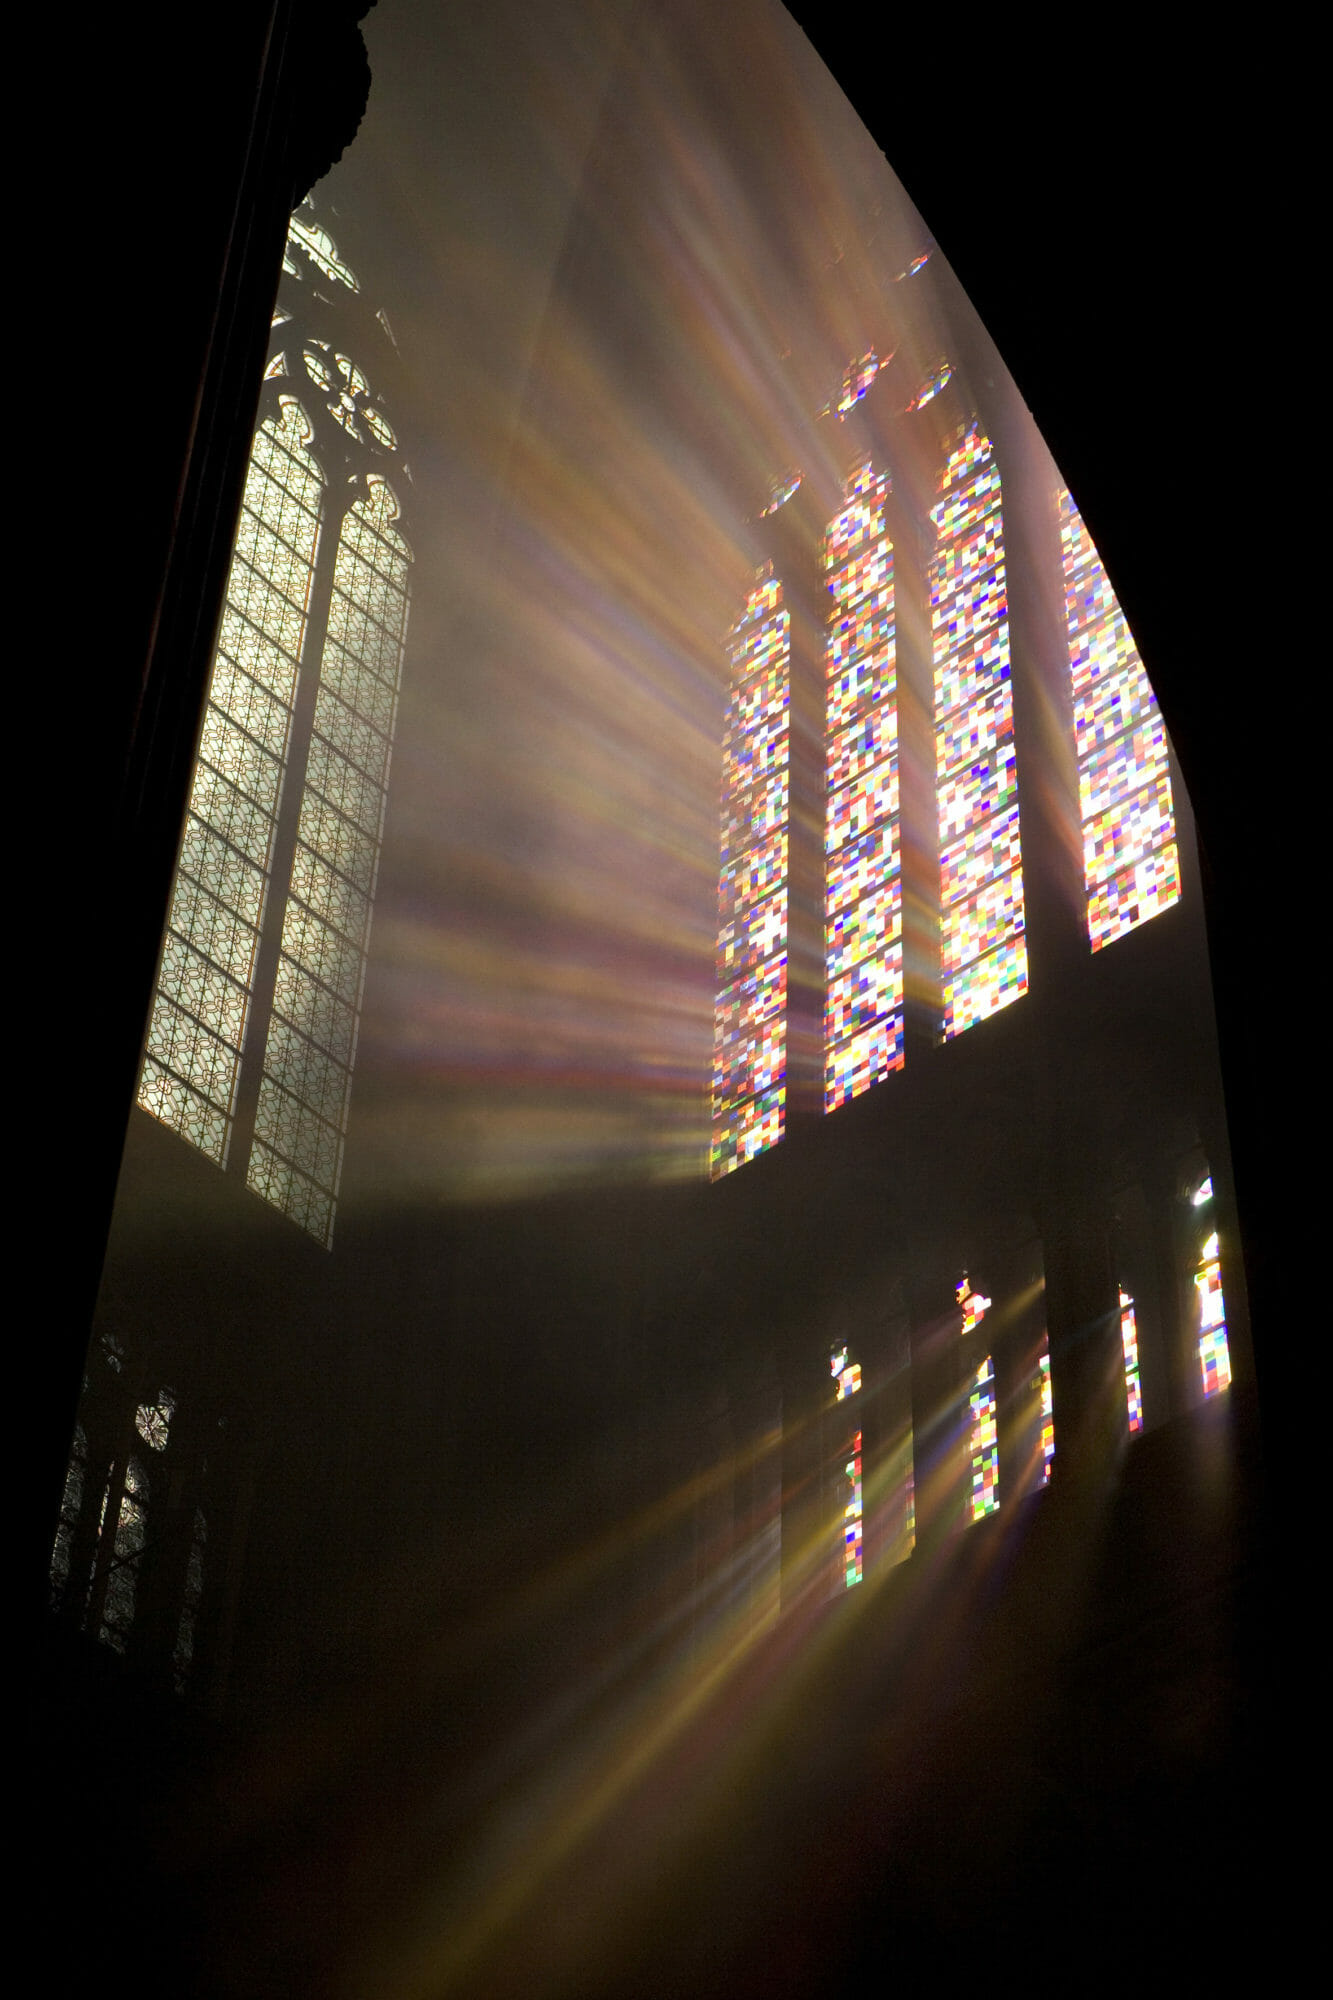 Gerhard Richter, South Transept Window of the Cologne Cathedral, 2007. Stained glass.